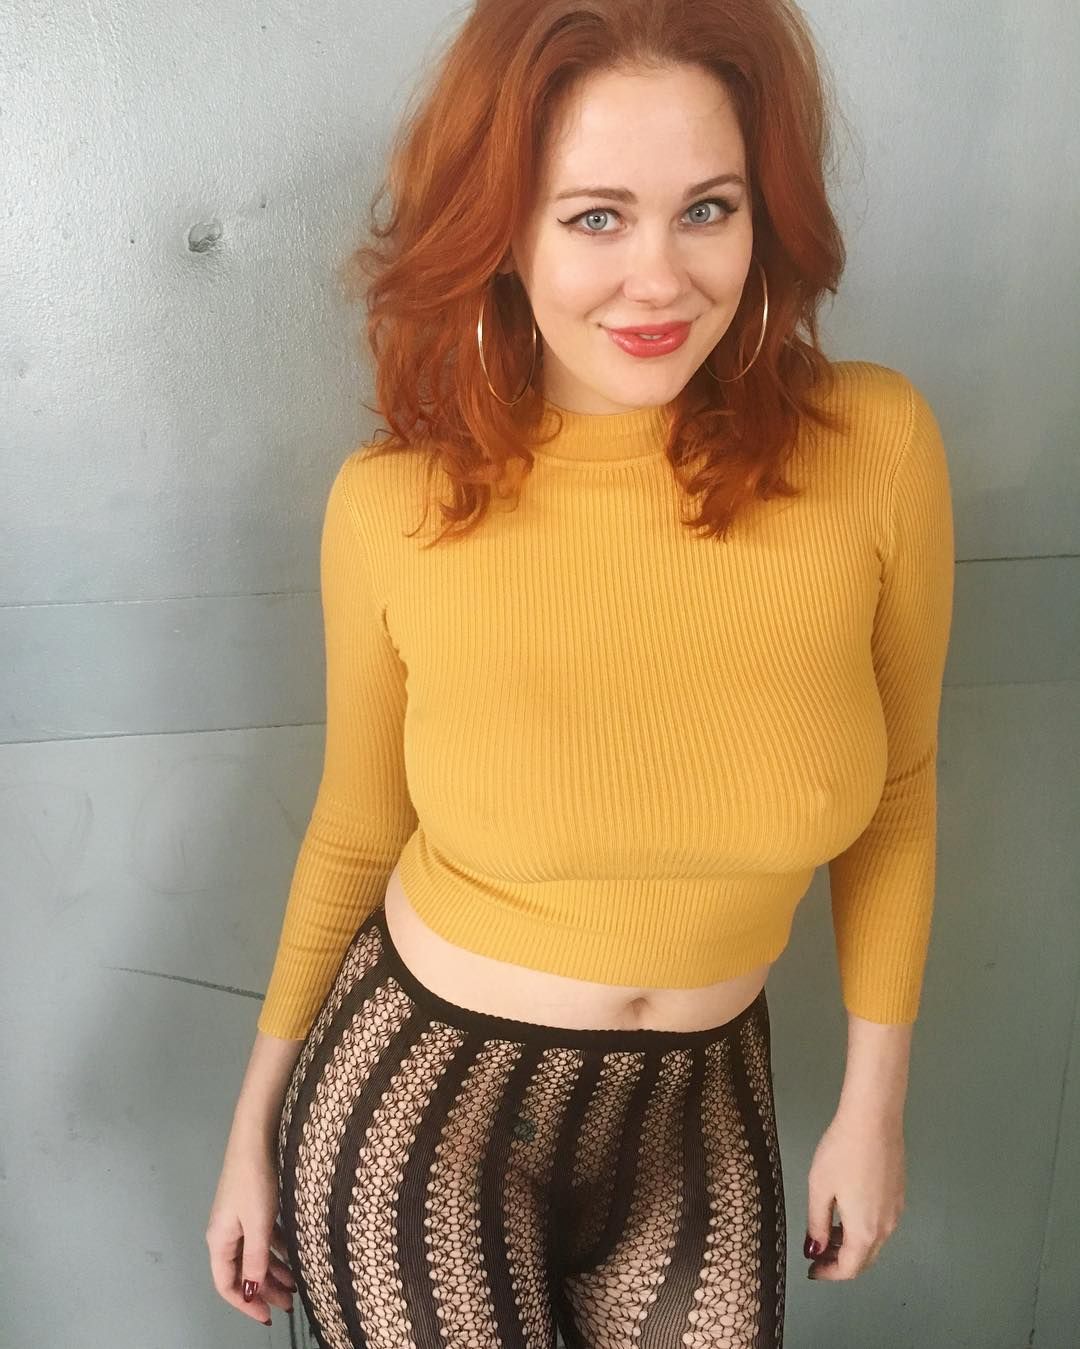 Nudography maitland ward Nudity in